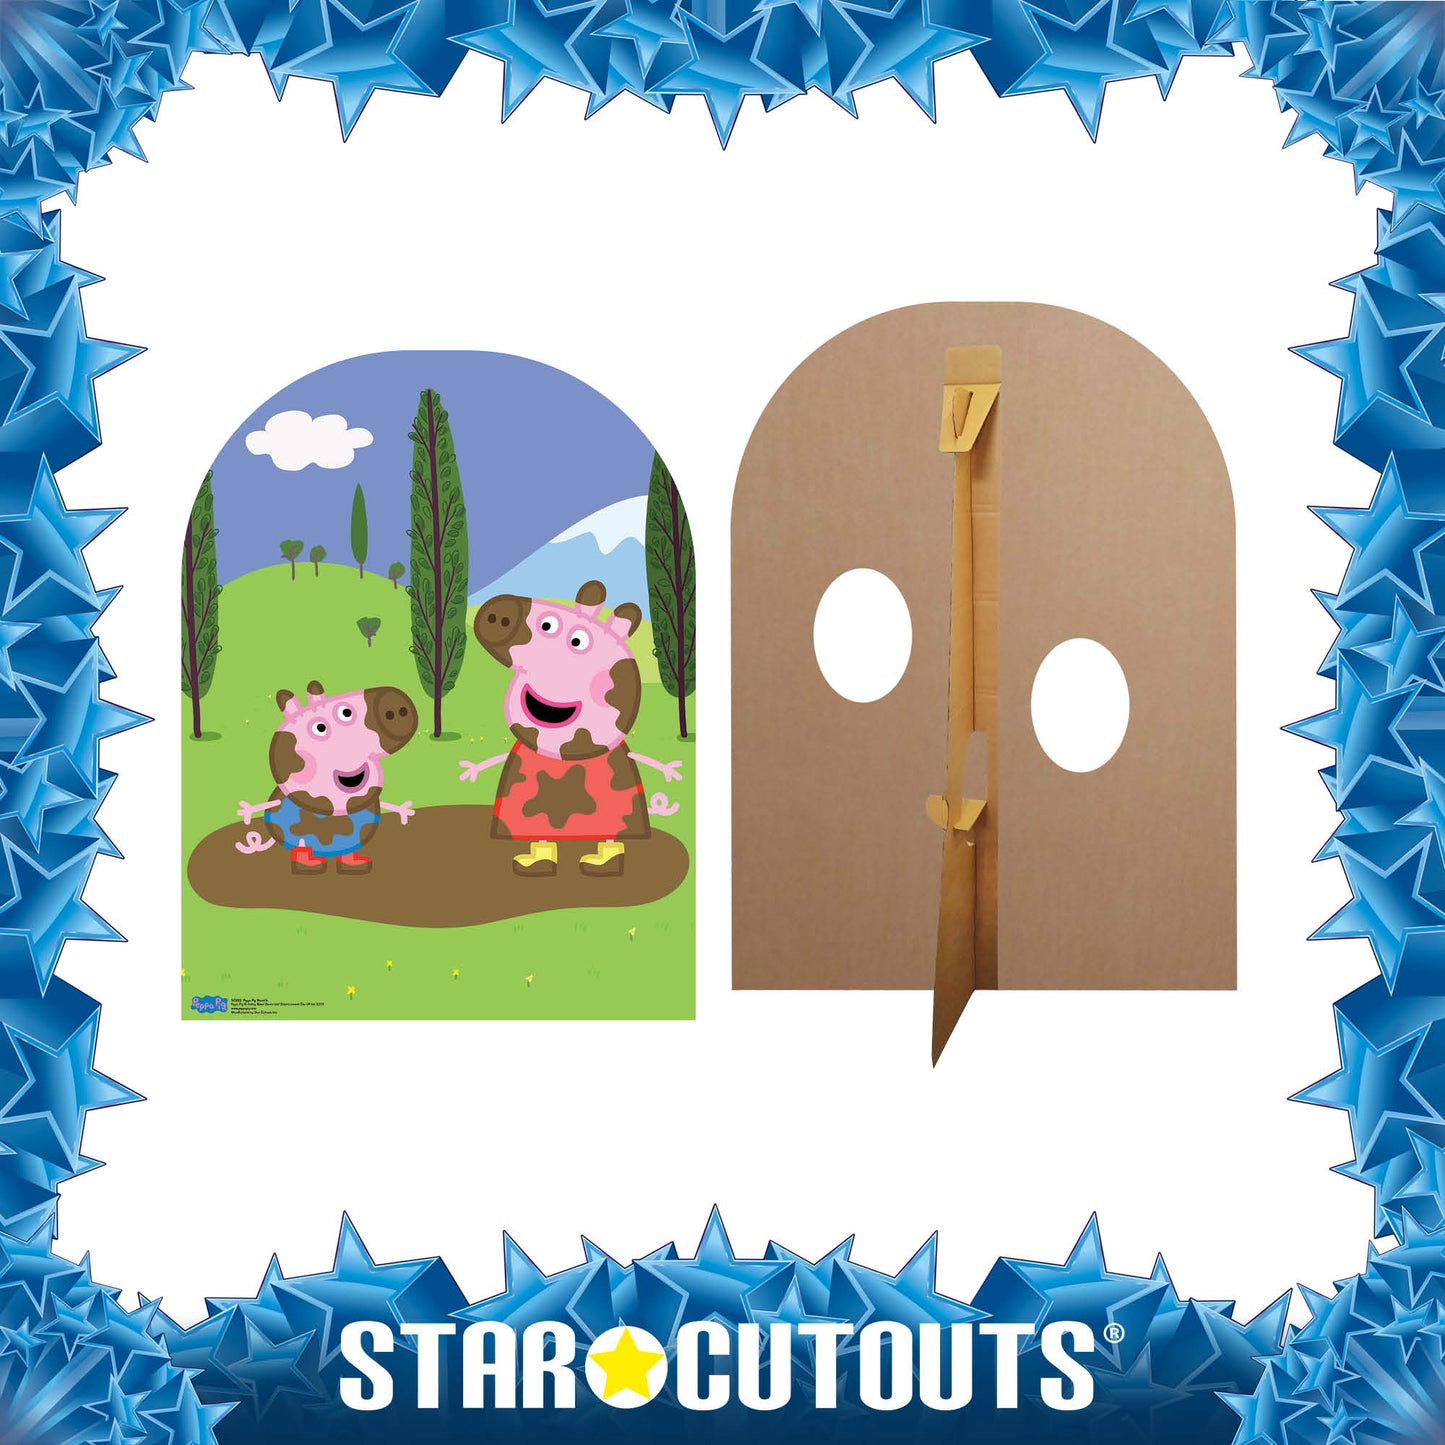 Peppa Pig Stand In Muddy Puddle Child Sized Cardboard Cutout